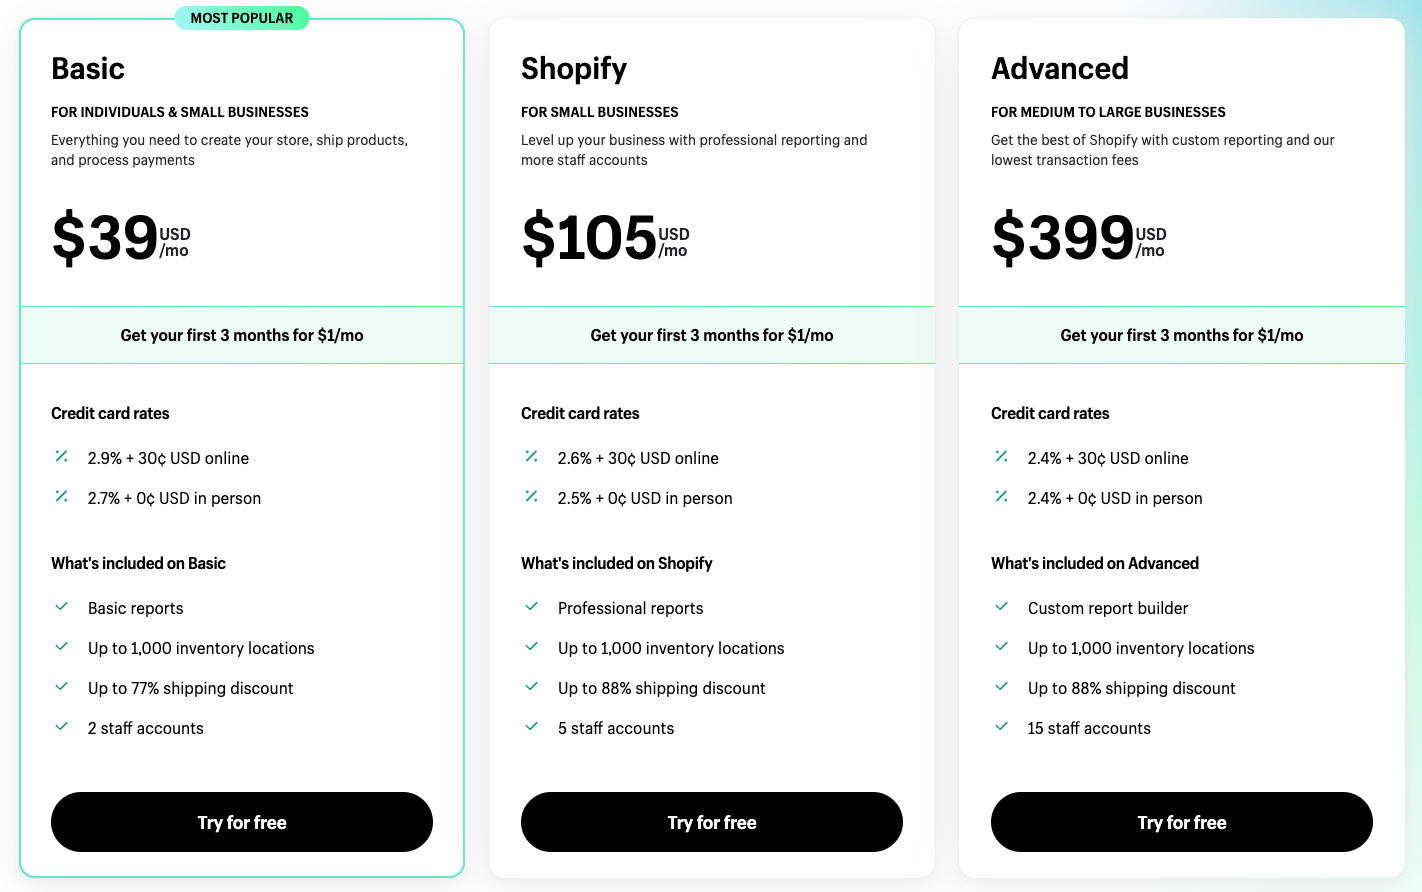 Shopify "Pricing" page offers insights into three plans, including Basic, Shopify and Advanced